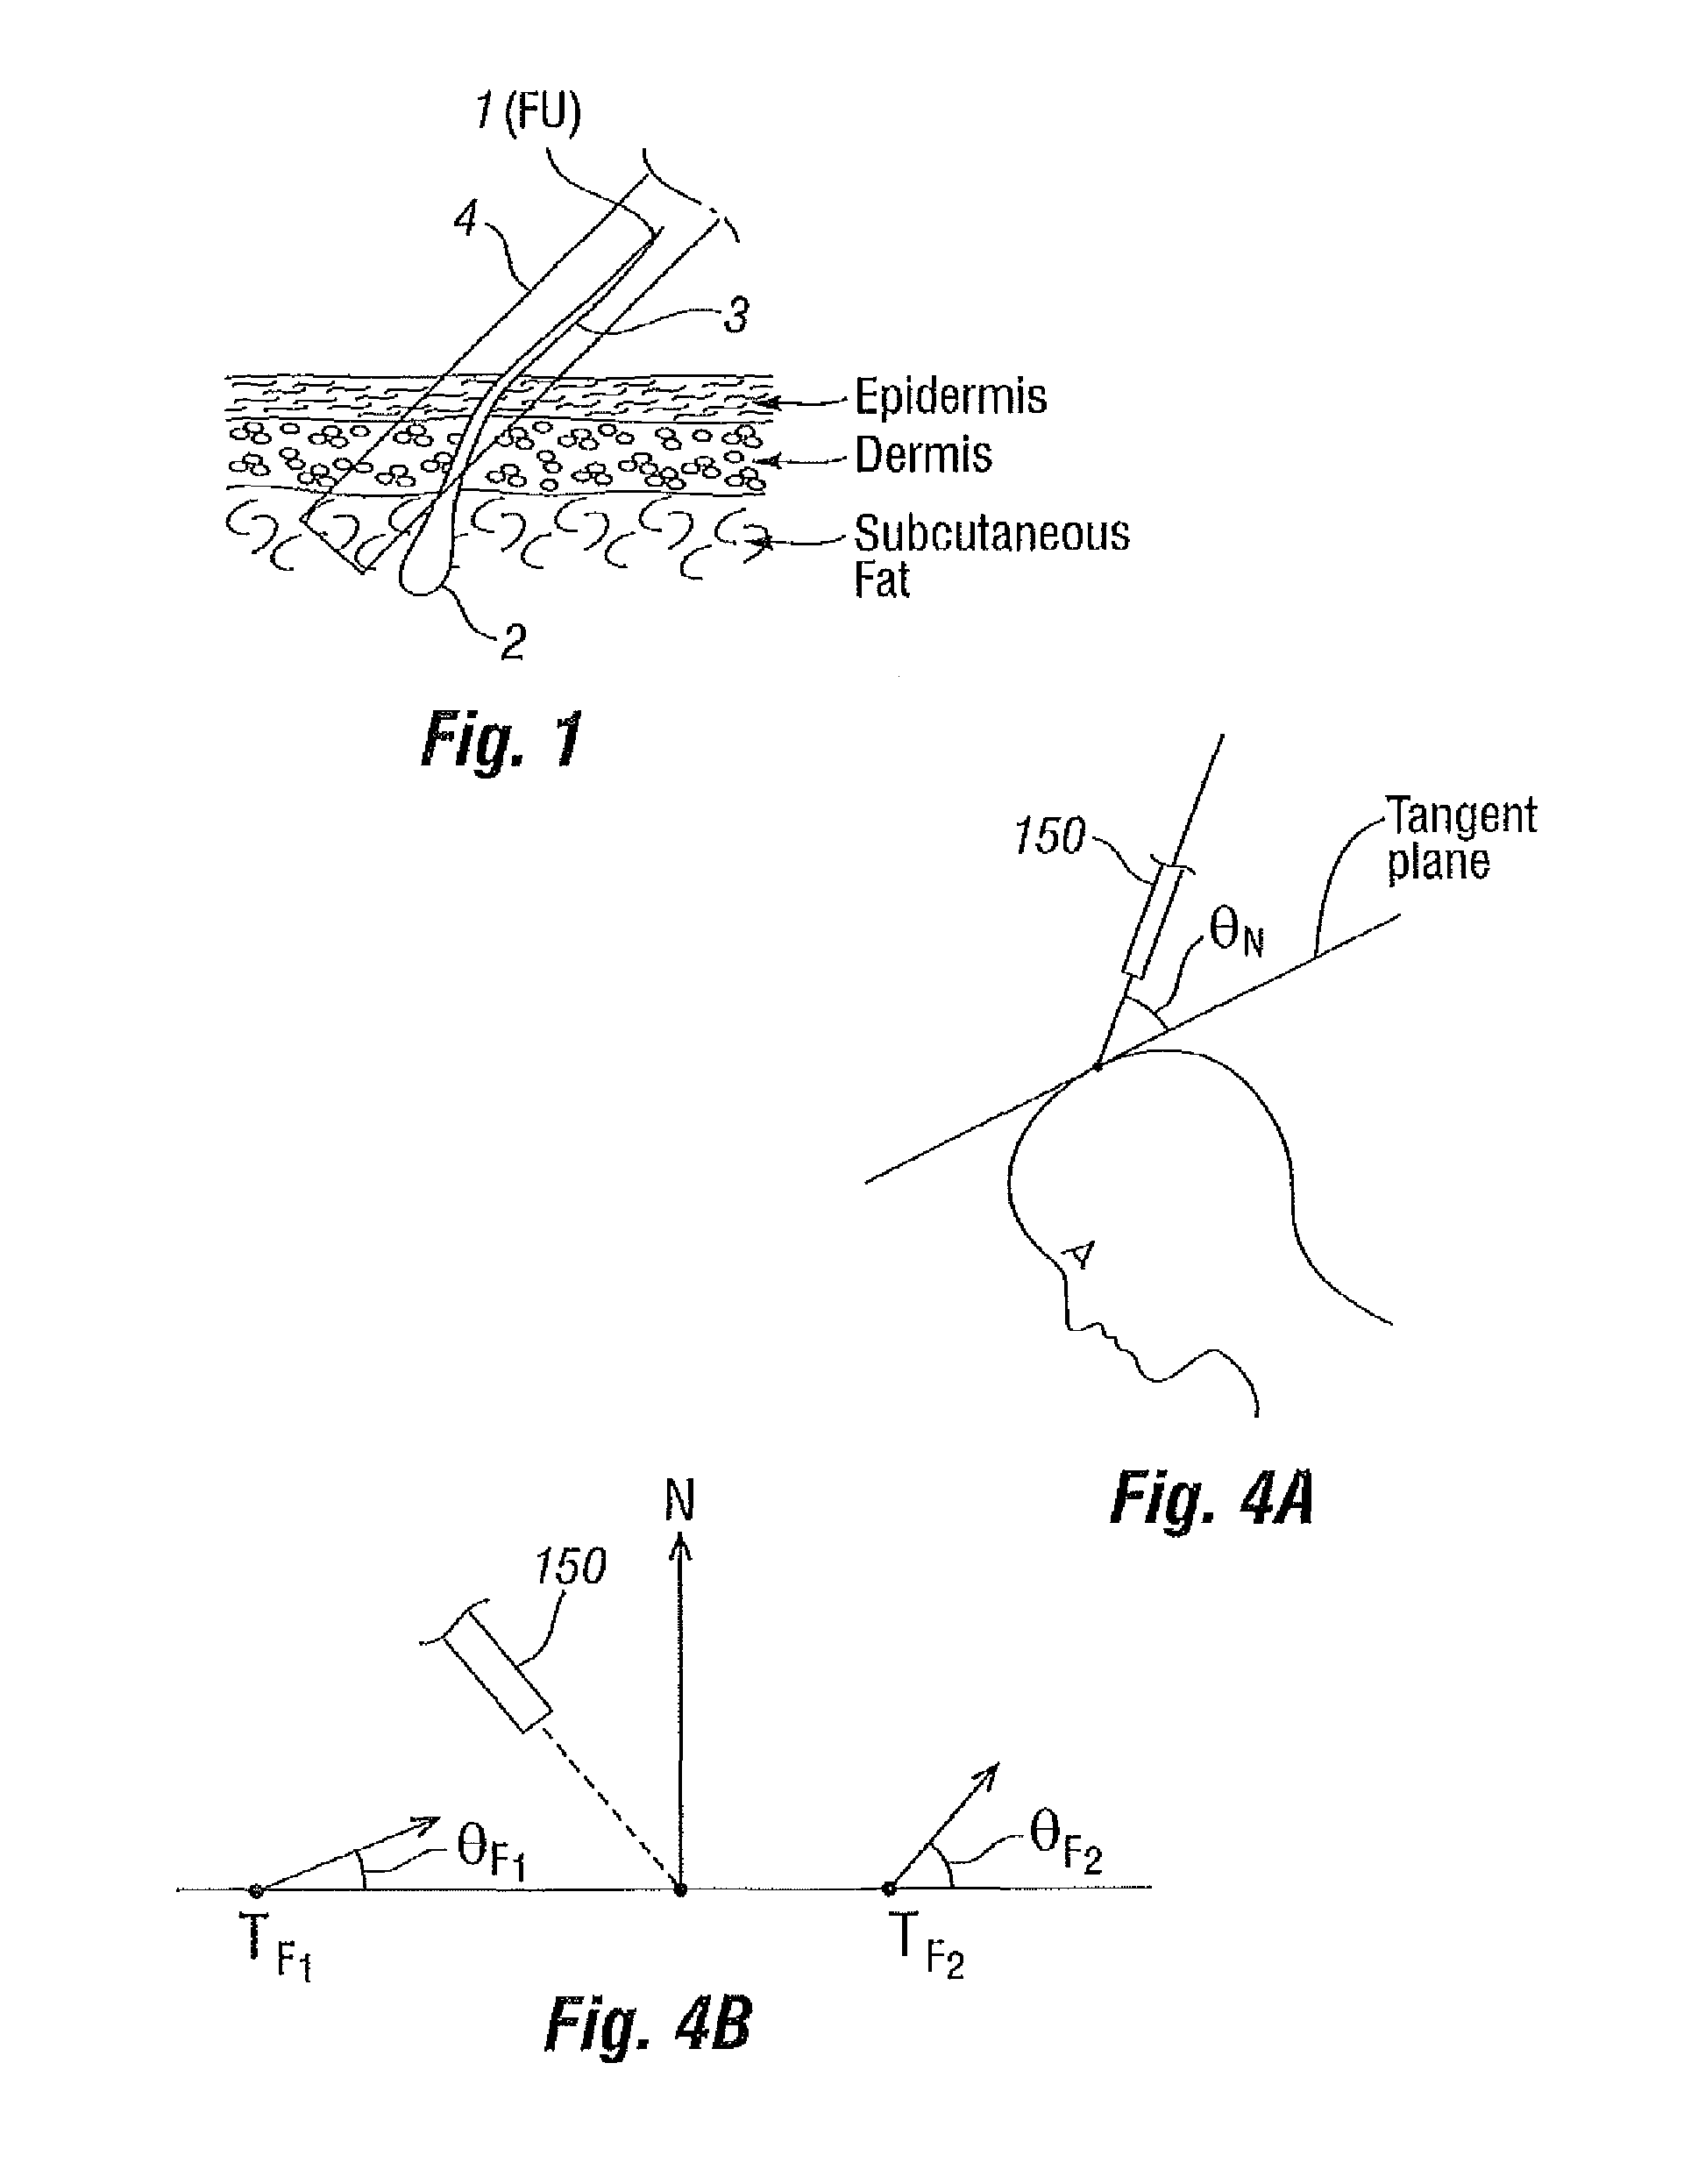 Systems and methods for harvesting and implanting hair using image-generated topological skin models